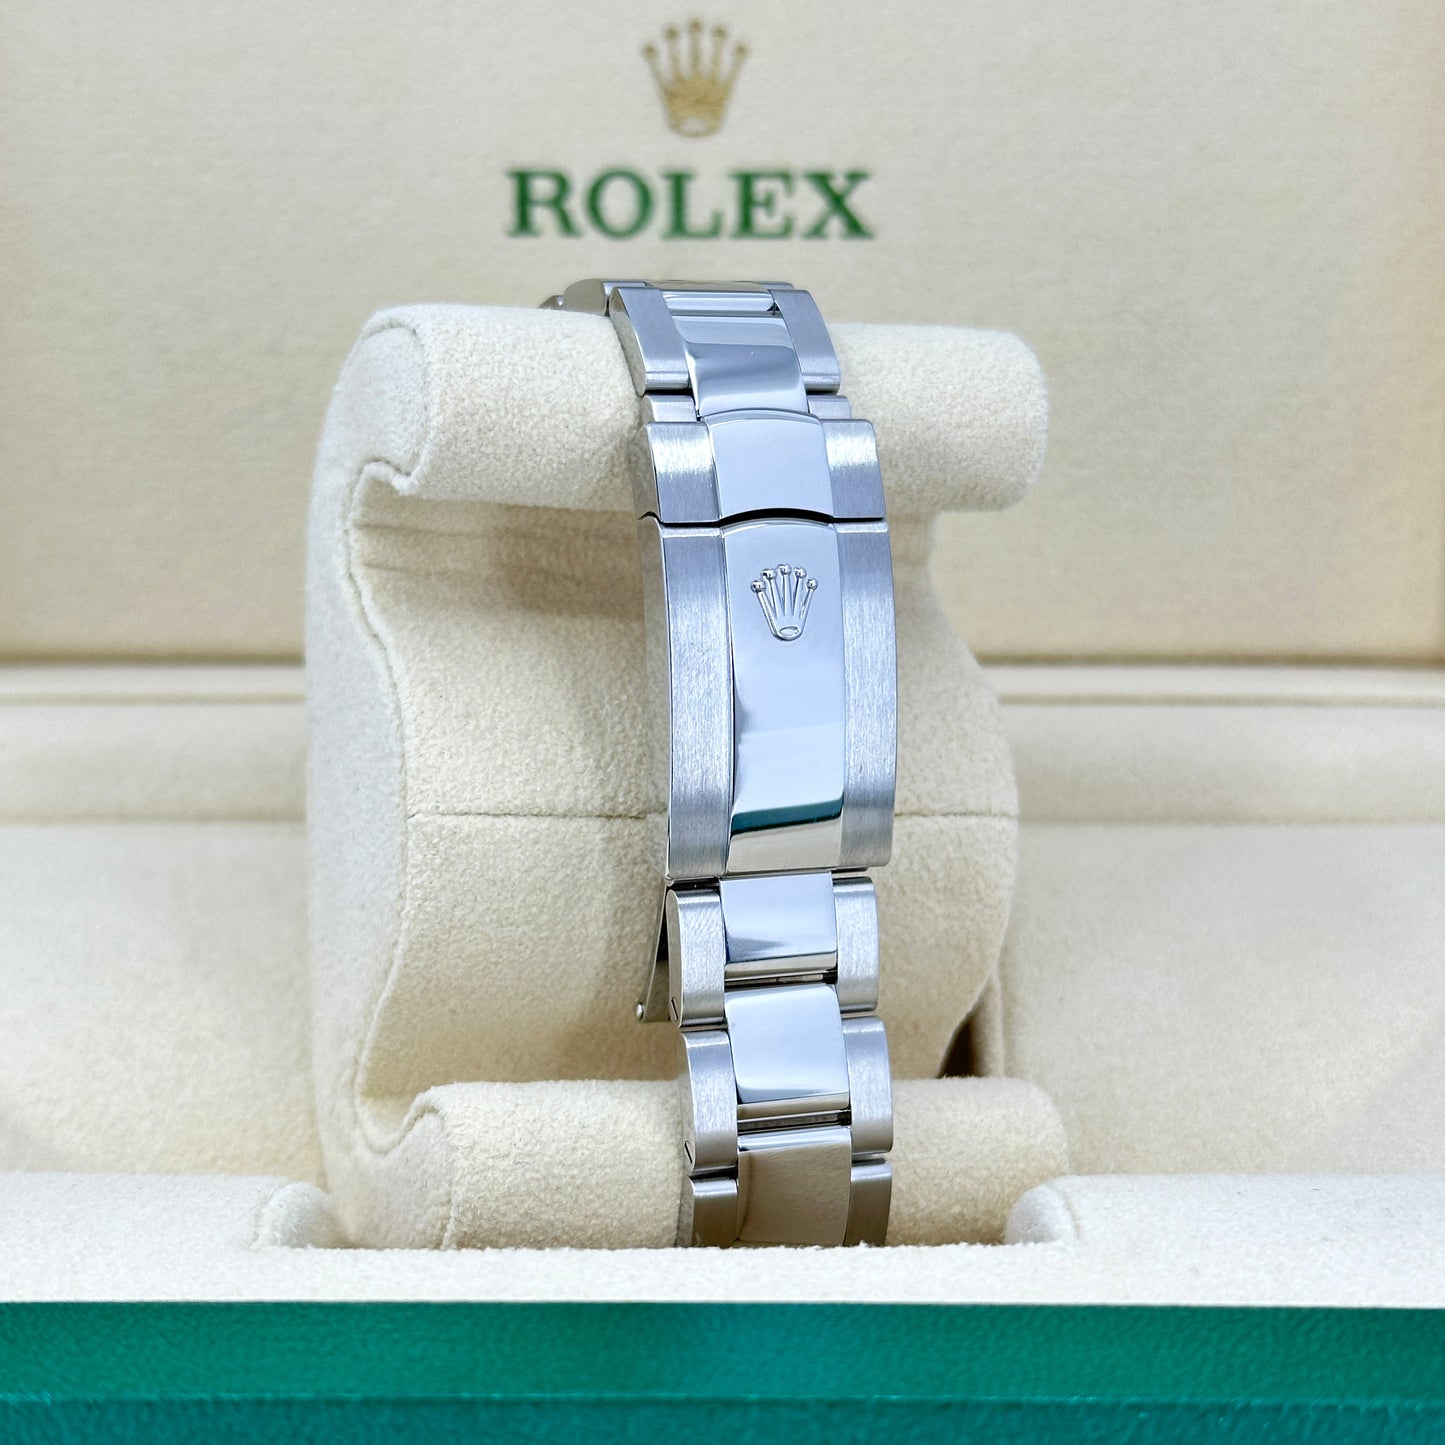 Rolex Datejust 41, Oystersteel and 18k White Gold, 41mm, Ref# 126334-0021